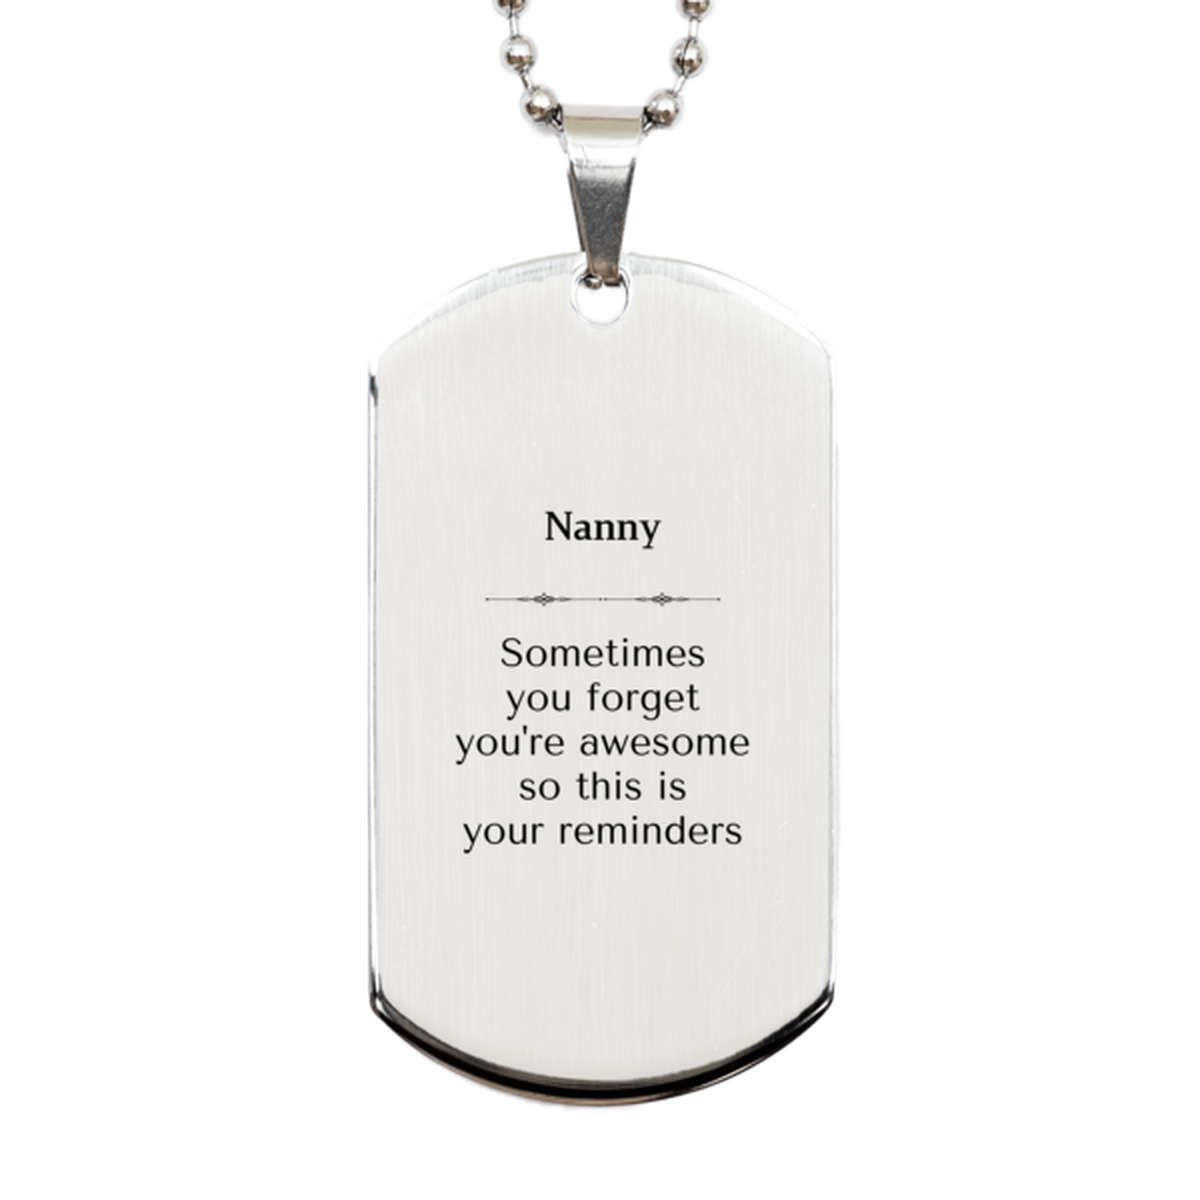 Sentimental Nanny Silver Dog Tag, Nanny Sometimes you forget you're awesome so this is your reminders, Graduation Christmas Birthday Gifts for Nanny, Men, Women, Coworkers